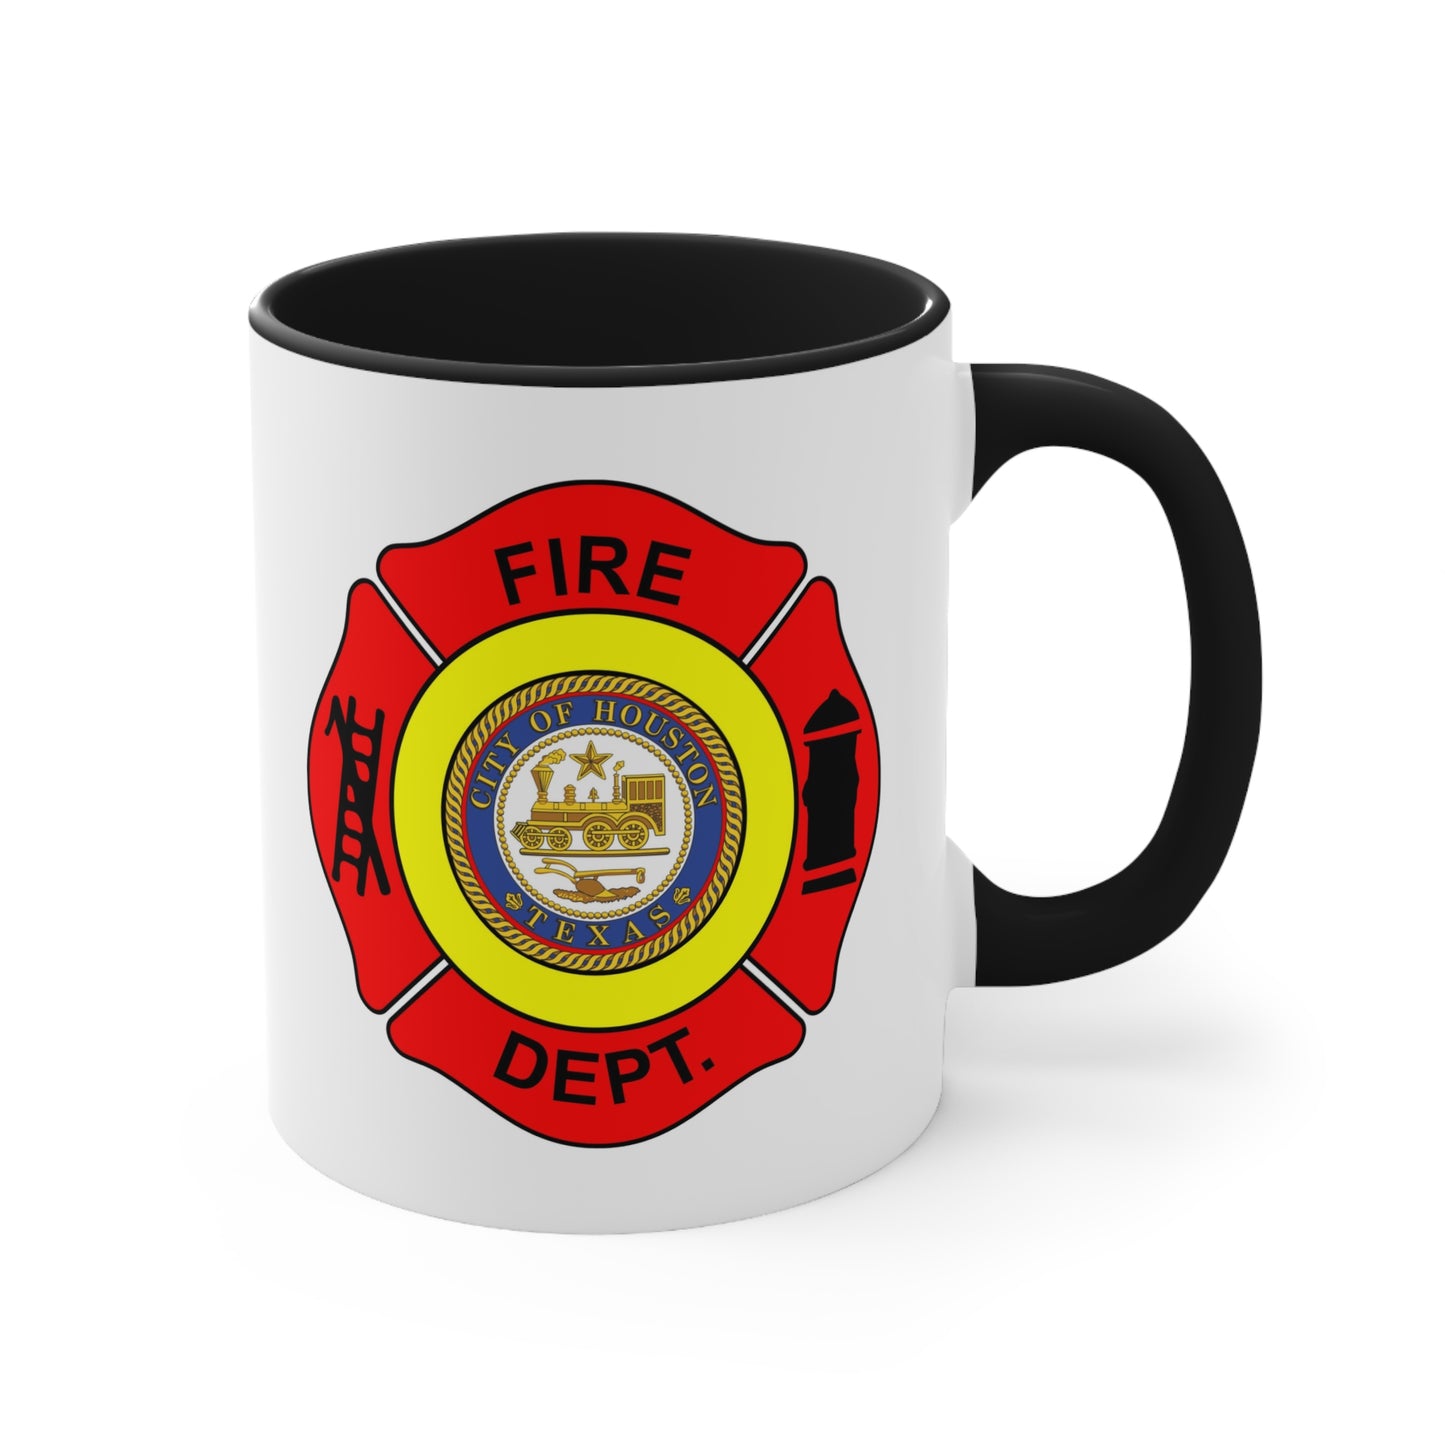 Houston Fire Department Coffee Mug - Double Sided Black Accent White Ceramic 11oz by TheGlassyLass